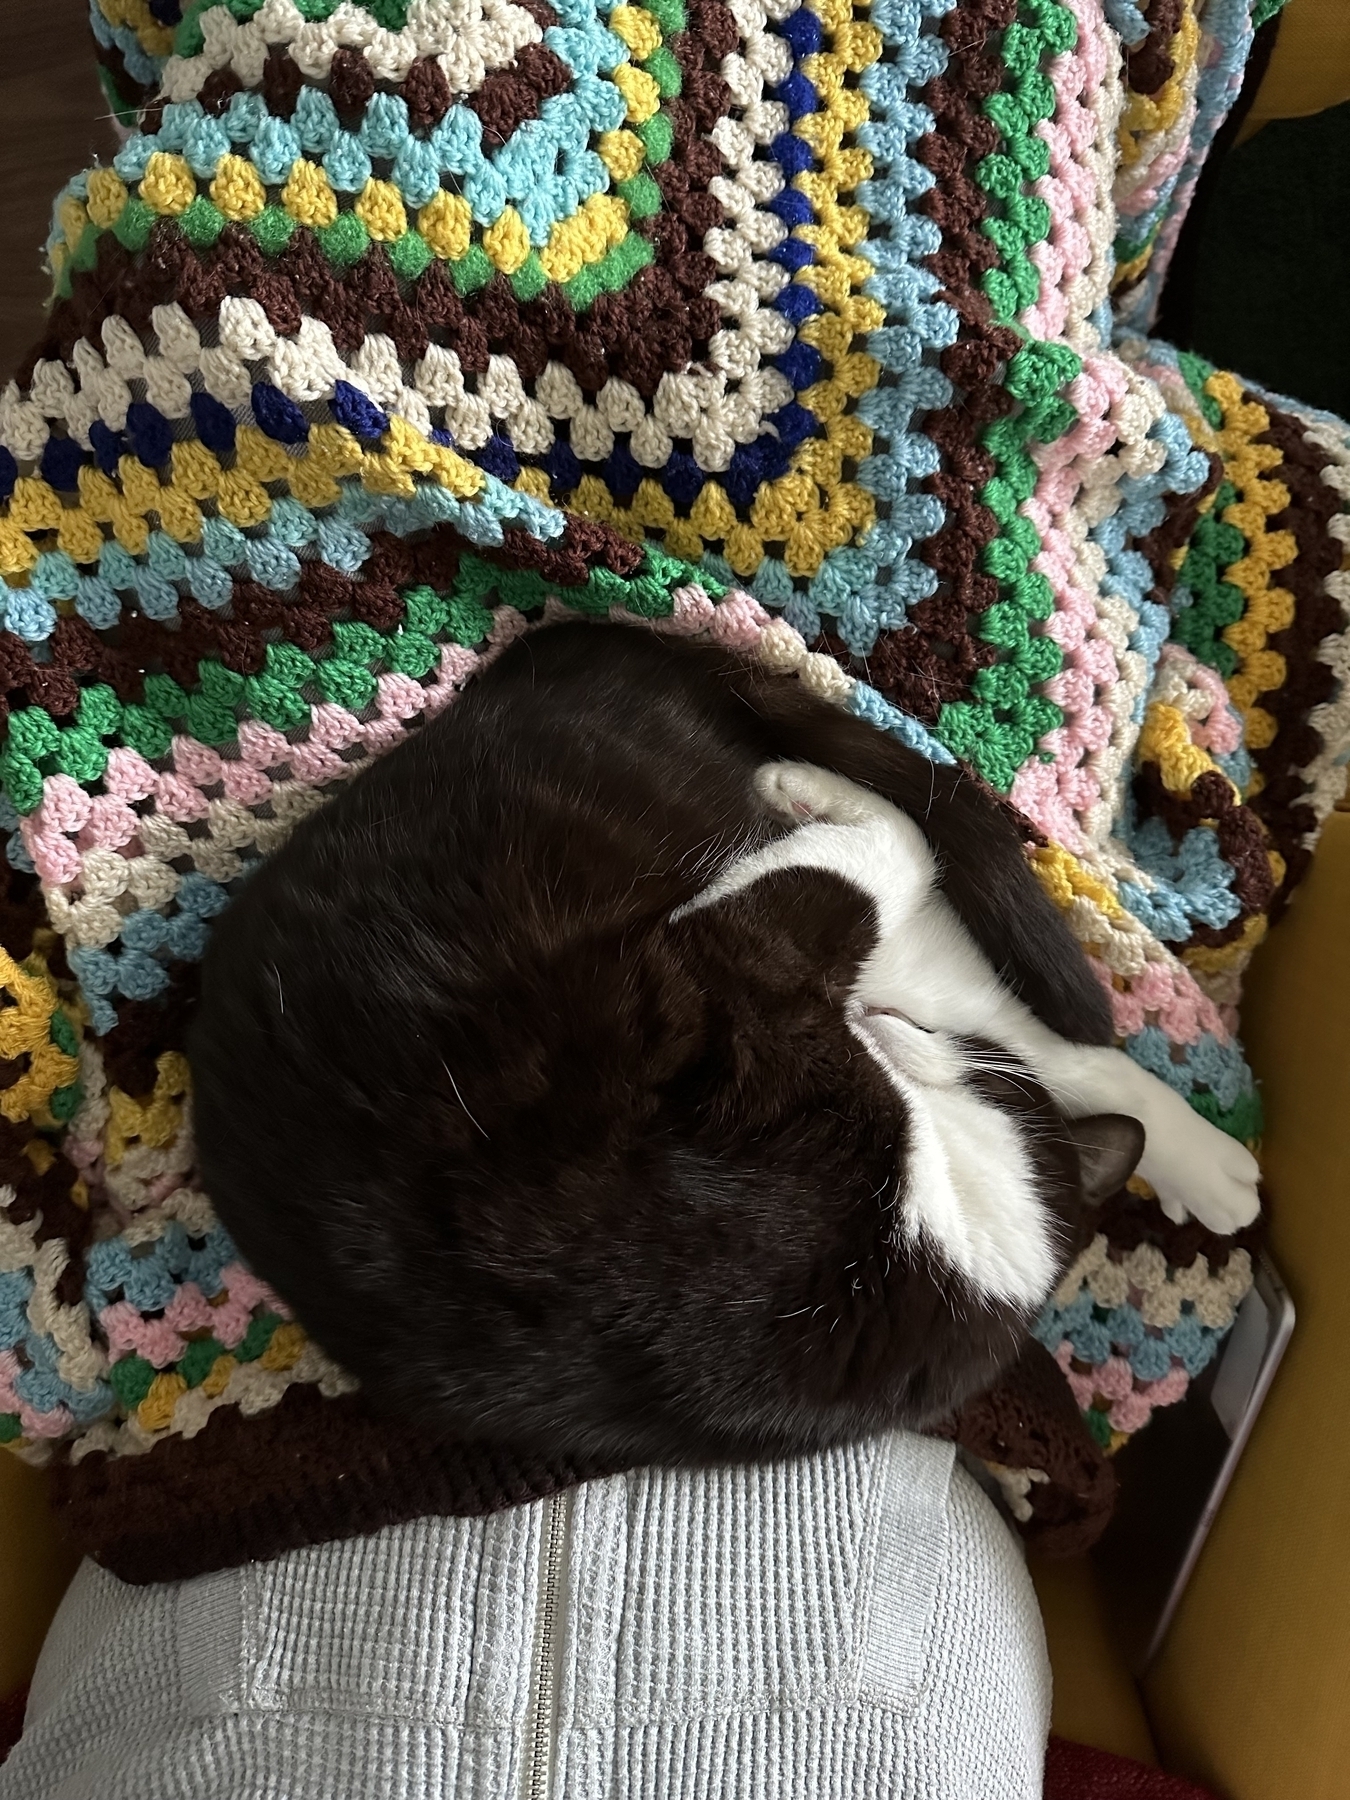 A black and white cat curled up on a lap. Under the cat is a crocheted blanket over the man’s legs. The blanket has light blue, pink, yellow, brown and green colours. The edges of a yellow chair he is sitting in are visible.